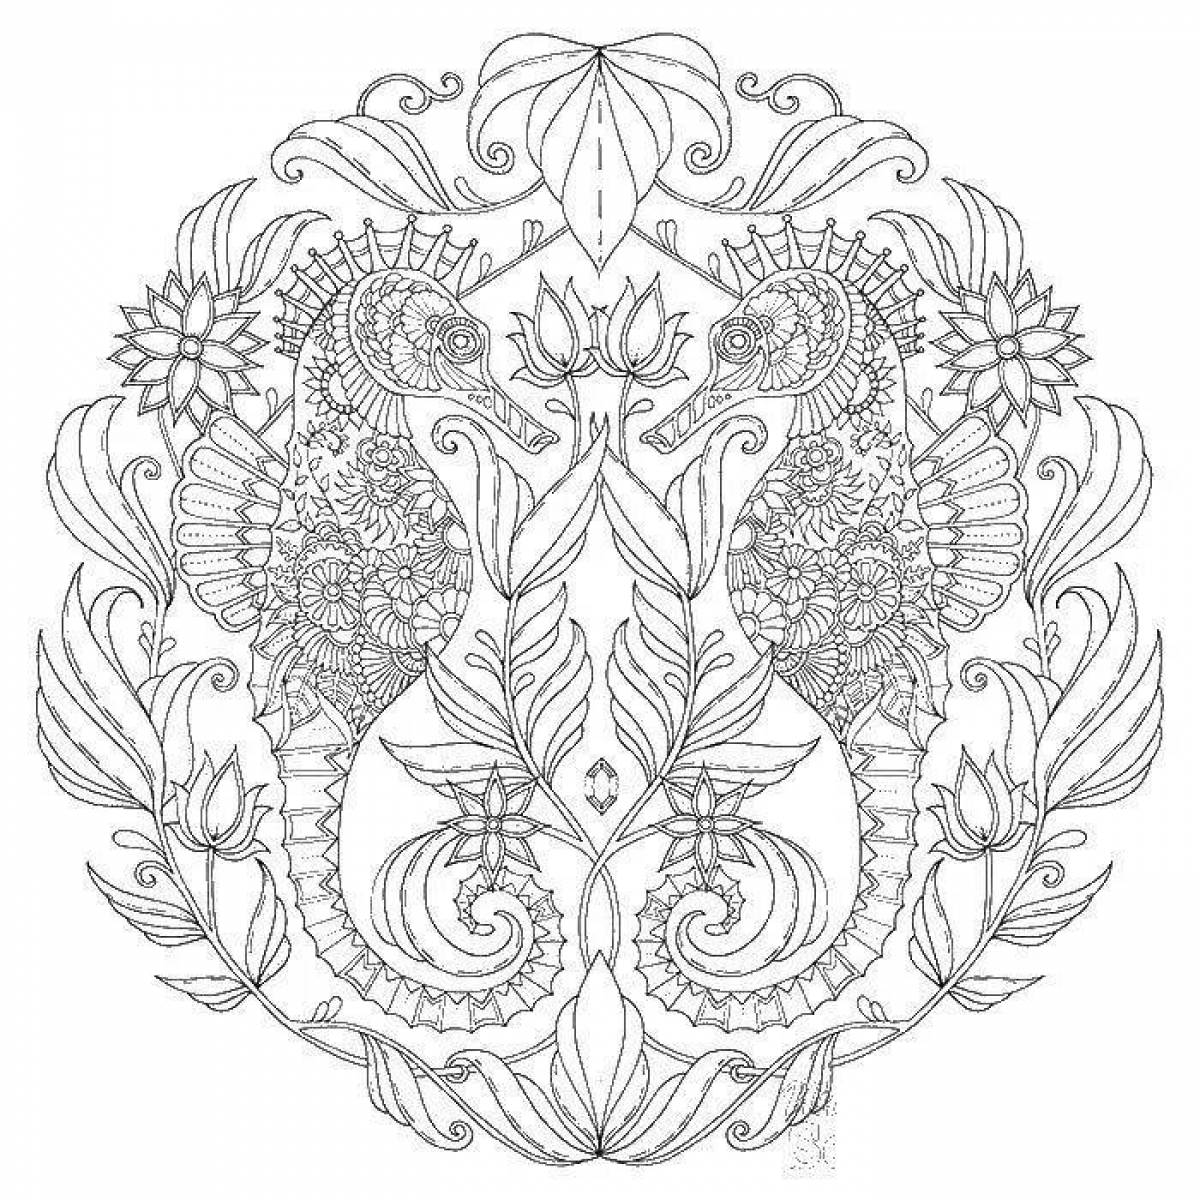 Playful lost ocean coloring page